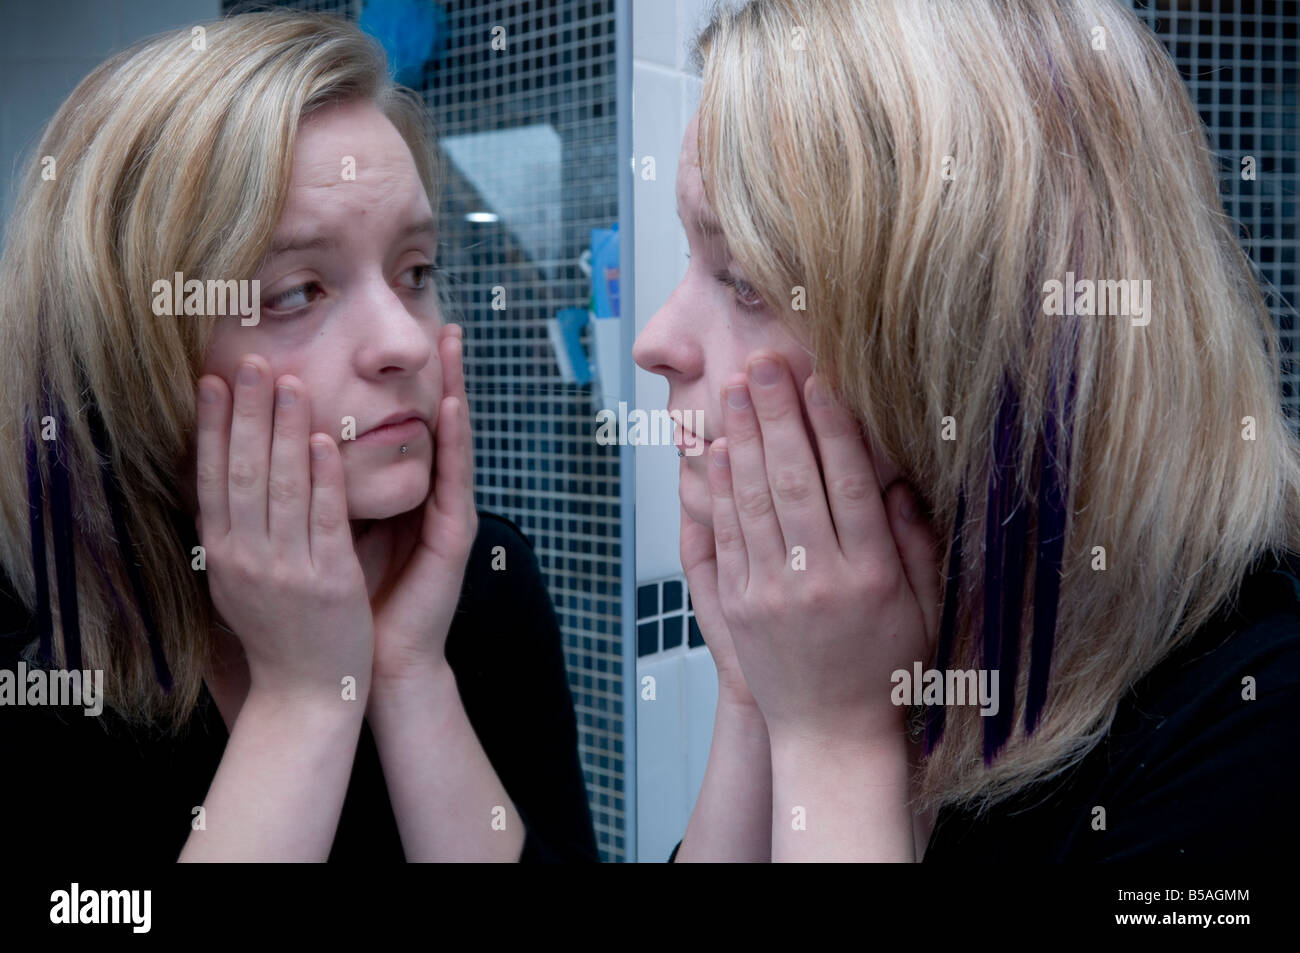 Concerned ill looking young woman looking at her reflection checking her complexion and skin condition in bathroom mirror Stock Photo